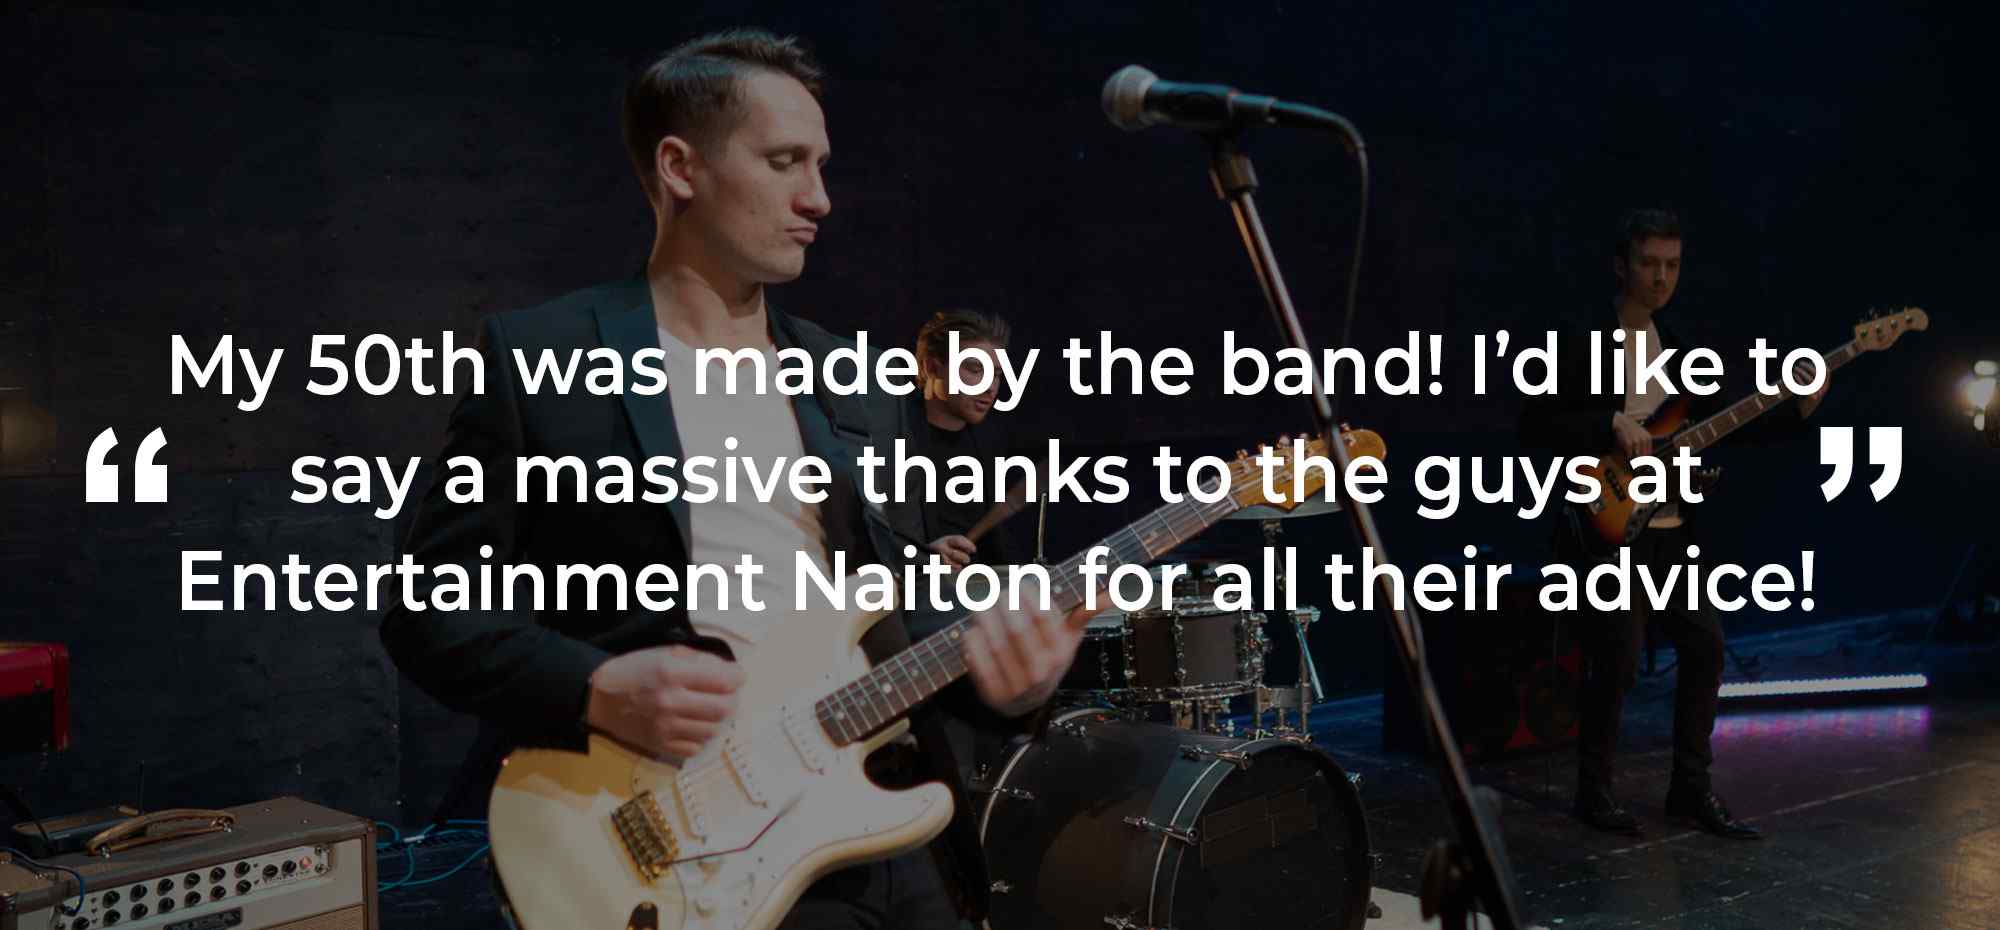 Client Review of a Party Band Devon